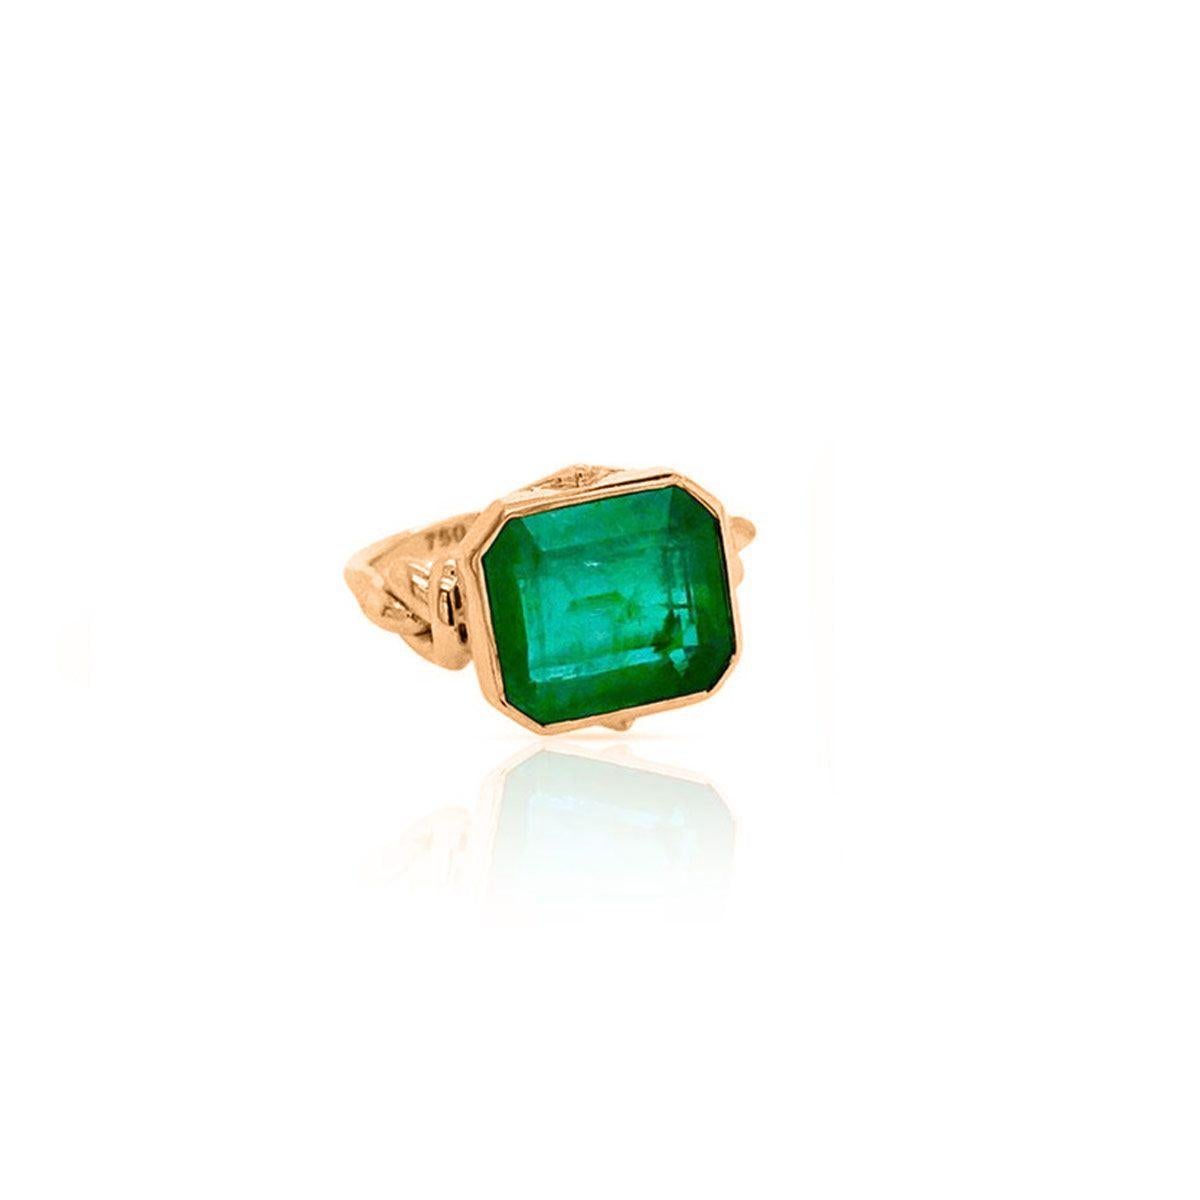 6ct Emerald Ring in 18ct Yellow Gold 5